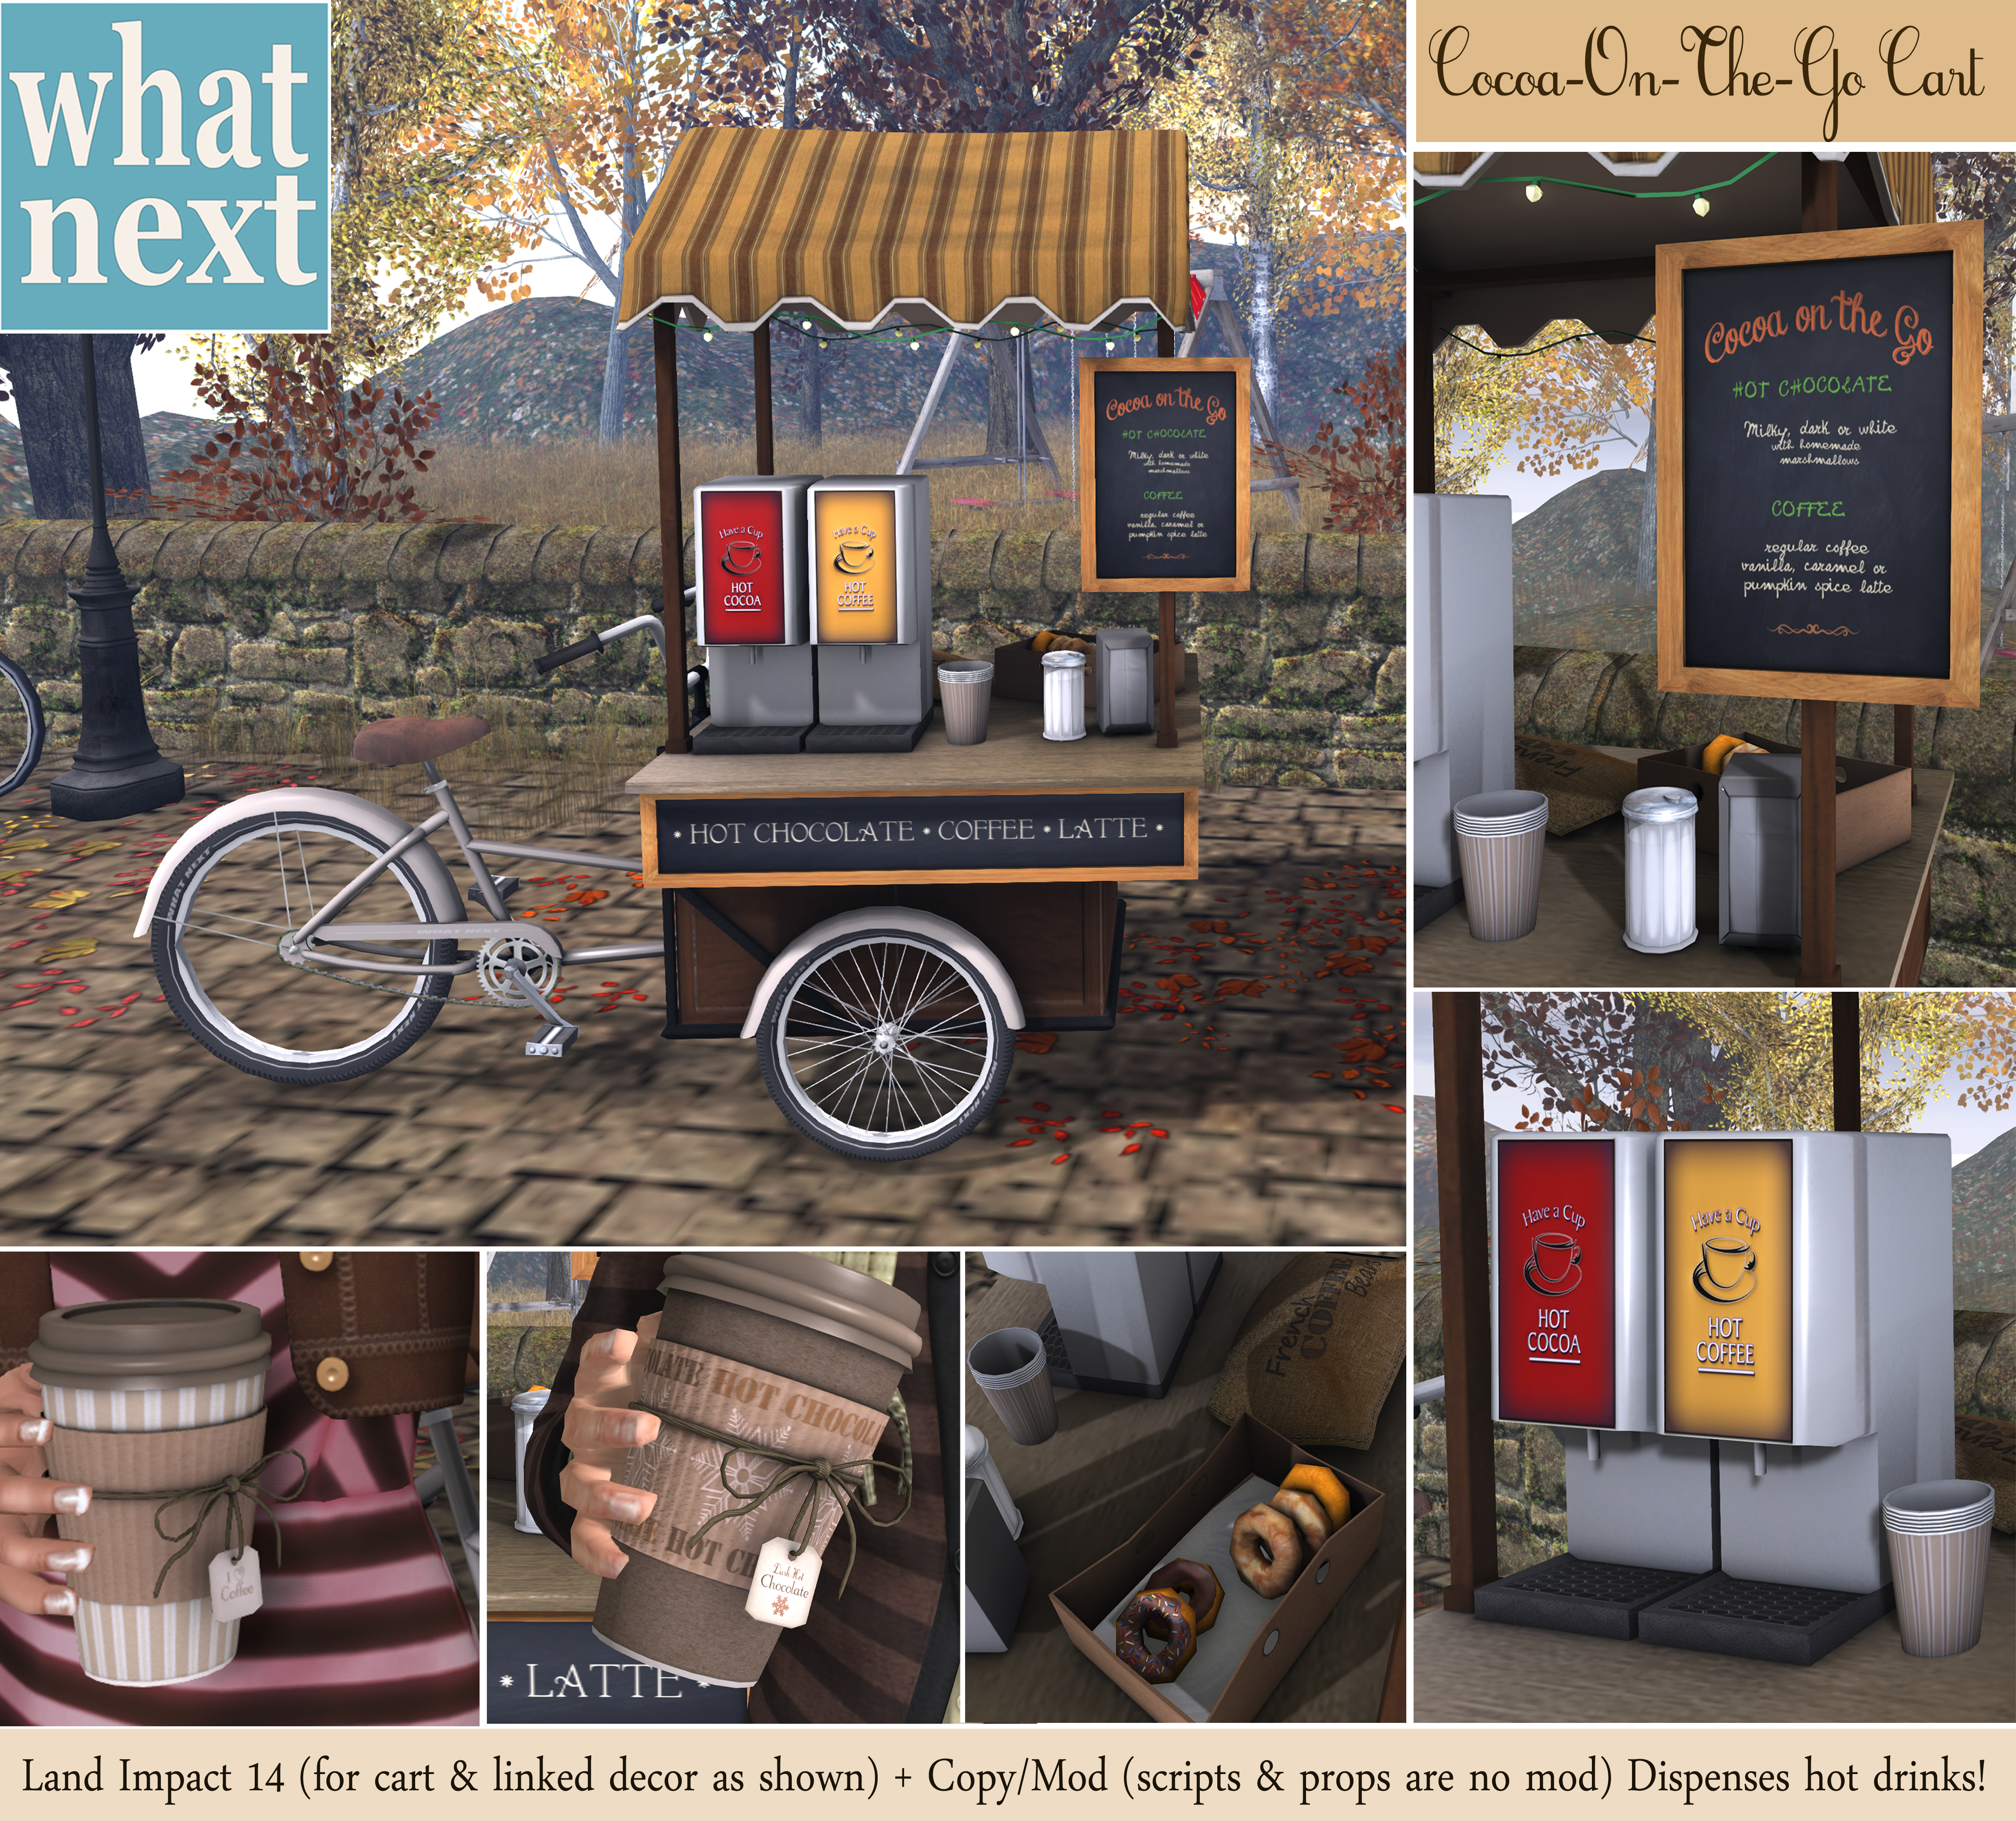 Cocoa-On-The-Go Cart at {what next}